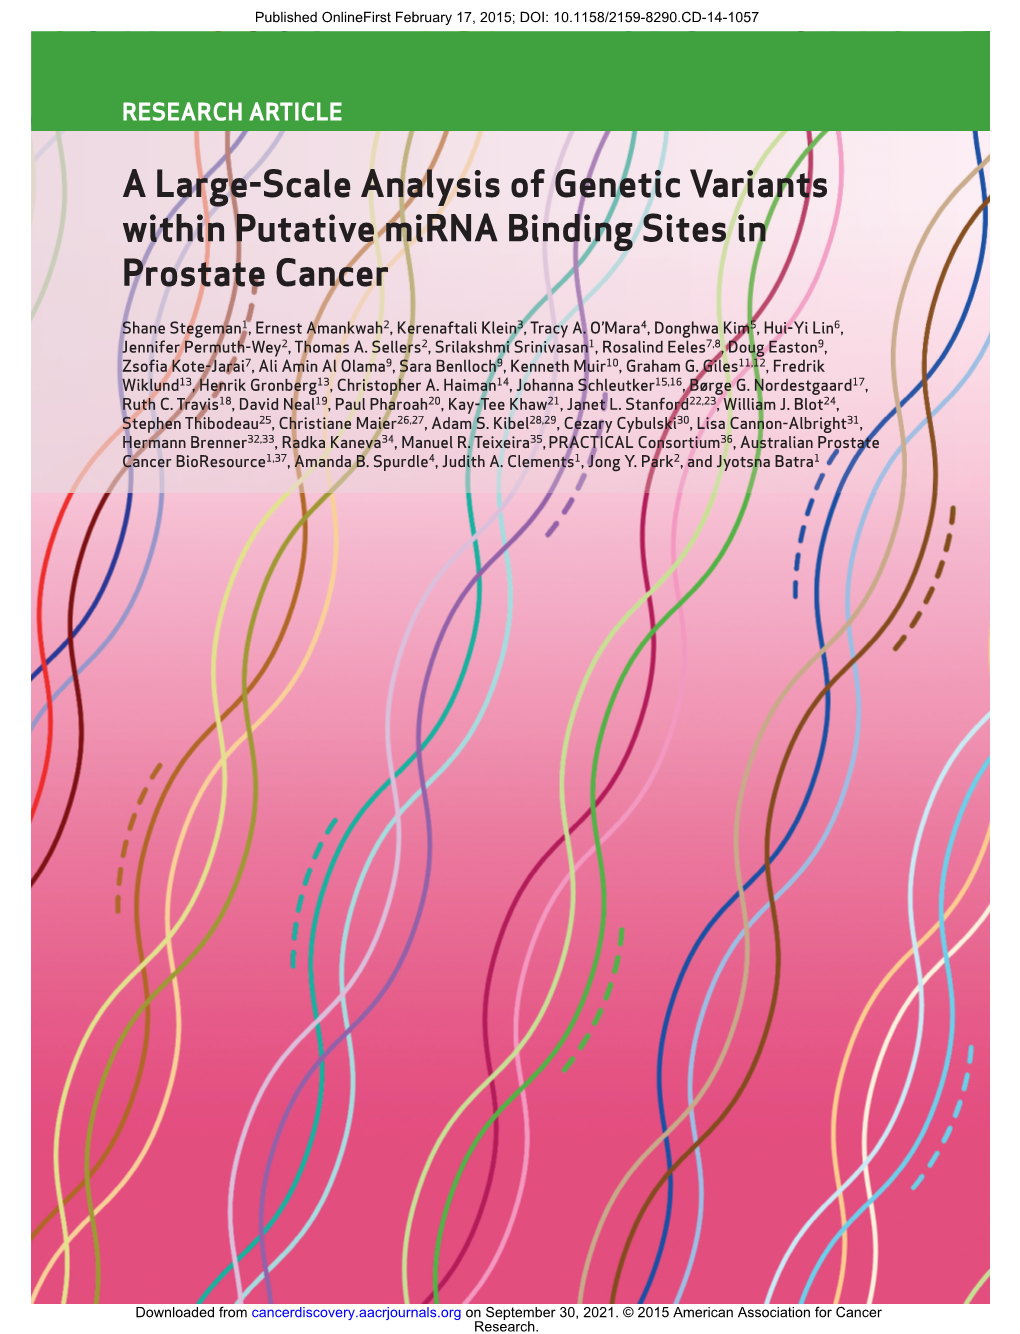 A Large-Scale Analysis of Genetic Variants Within Putative Mirna Binding Sites in Prostate Cancer